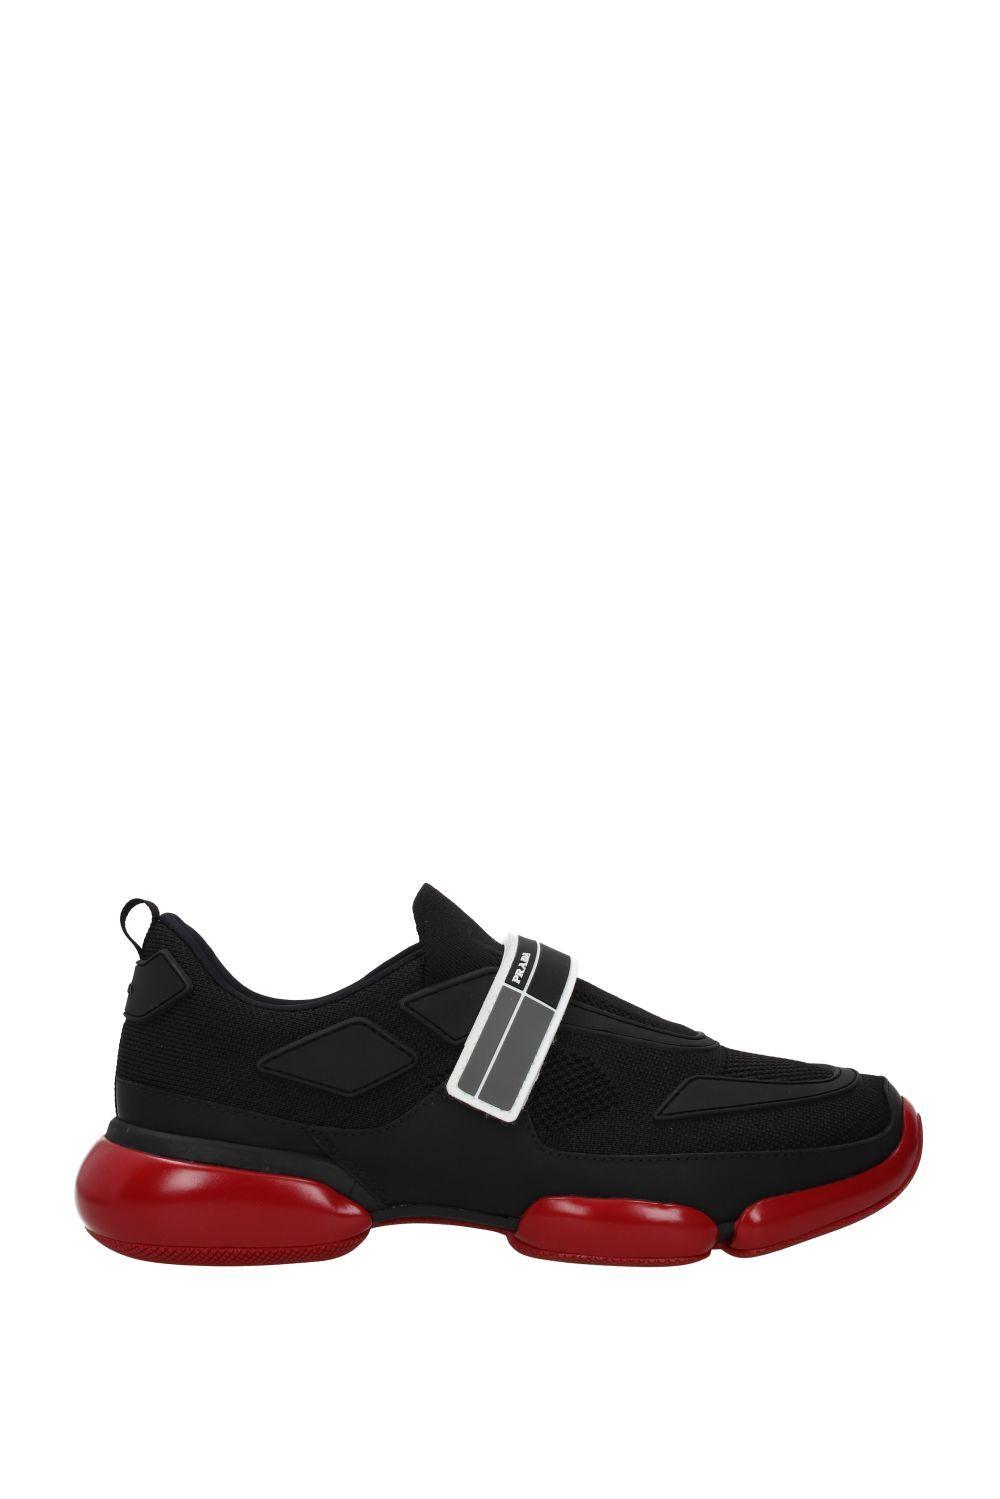 prada trainers black and red